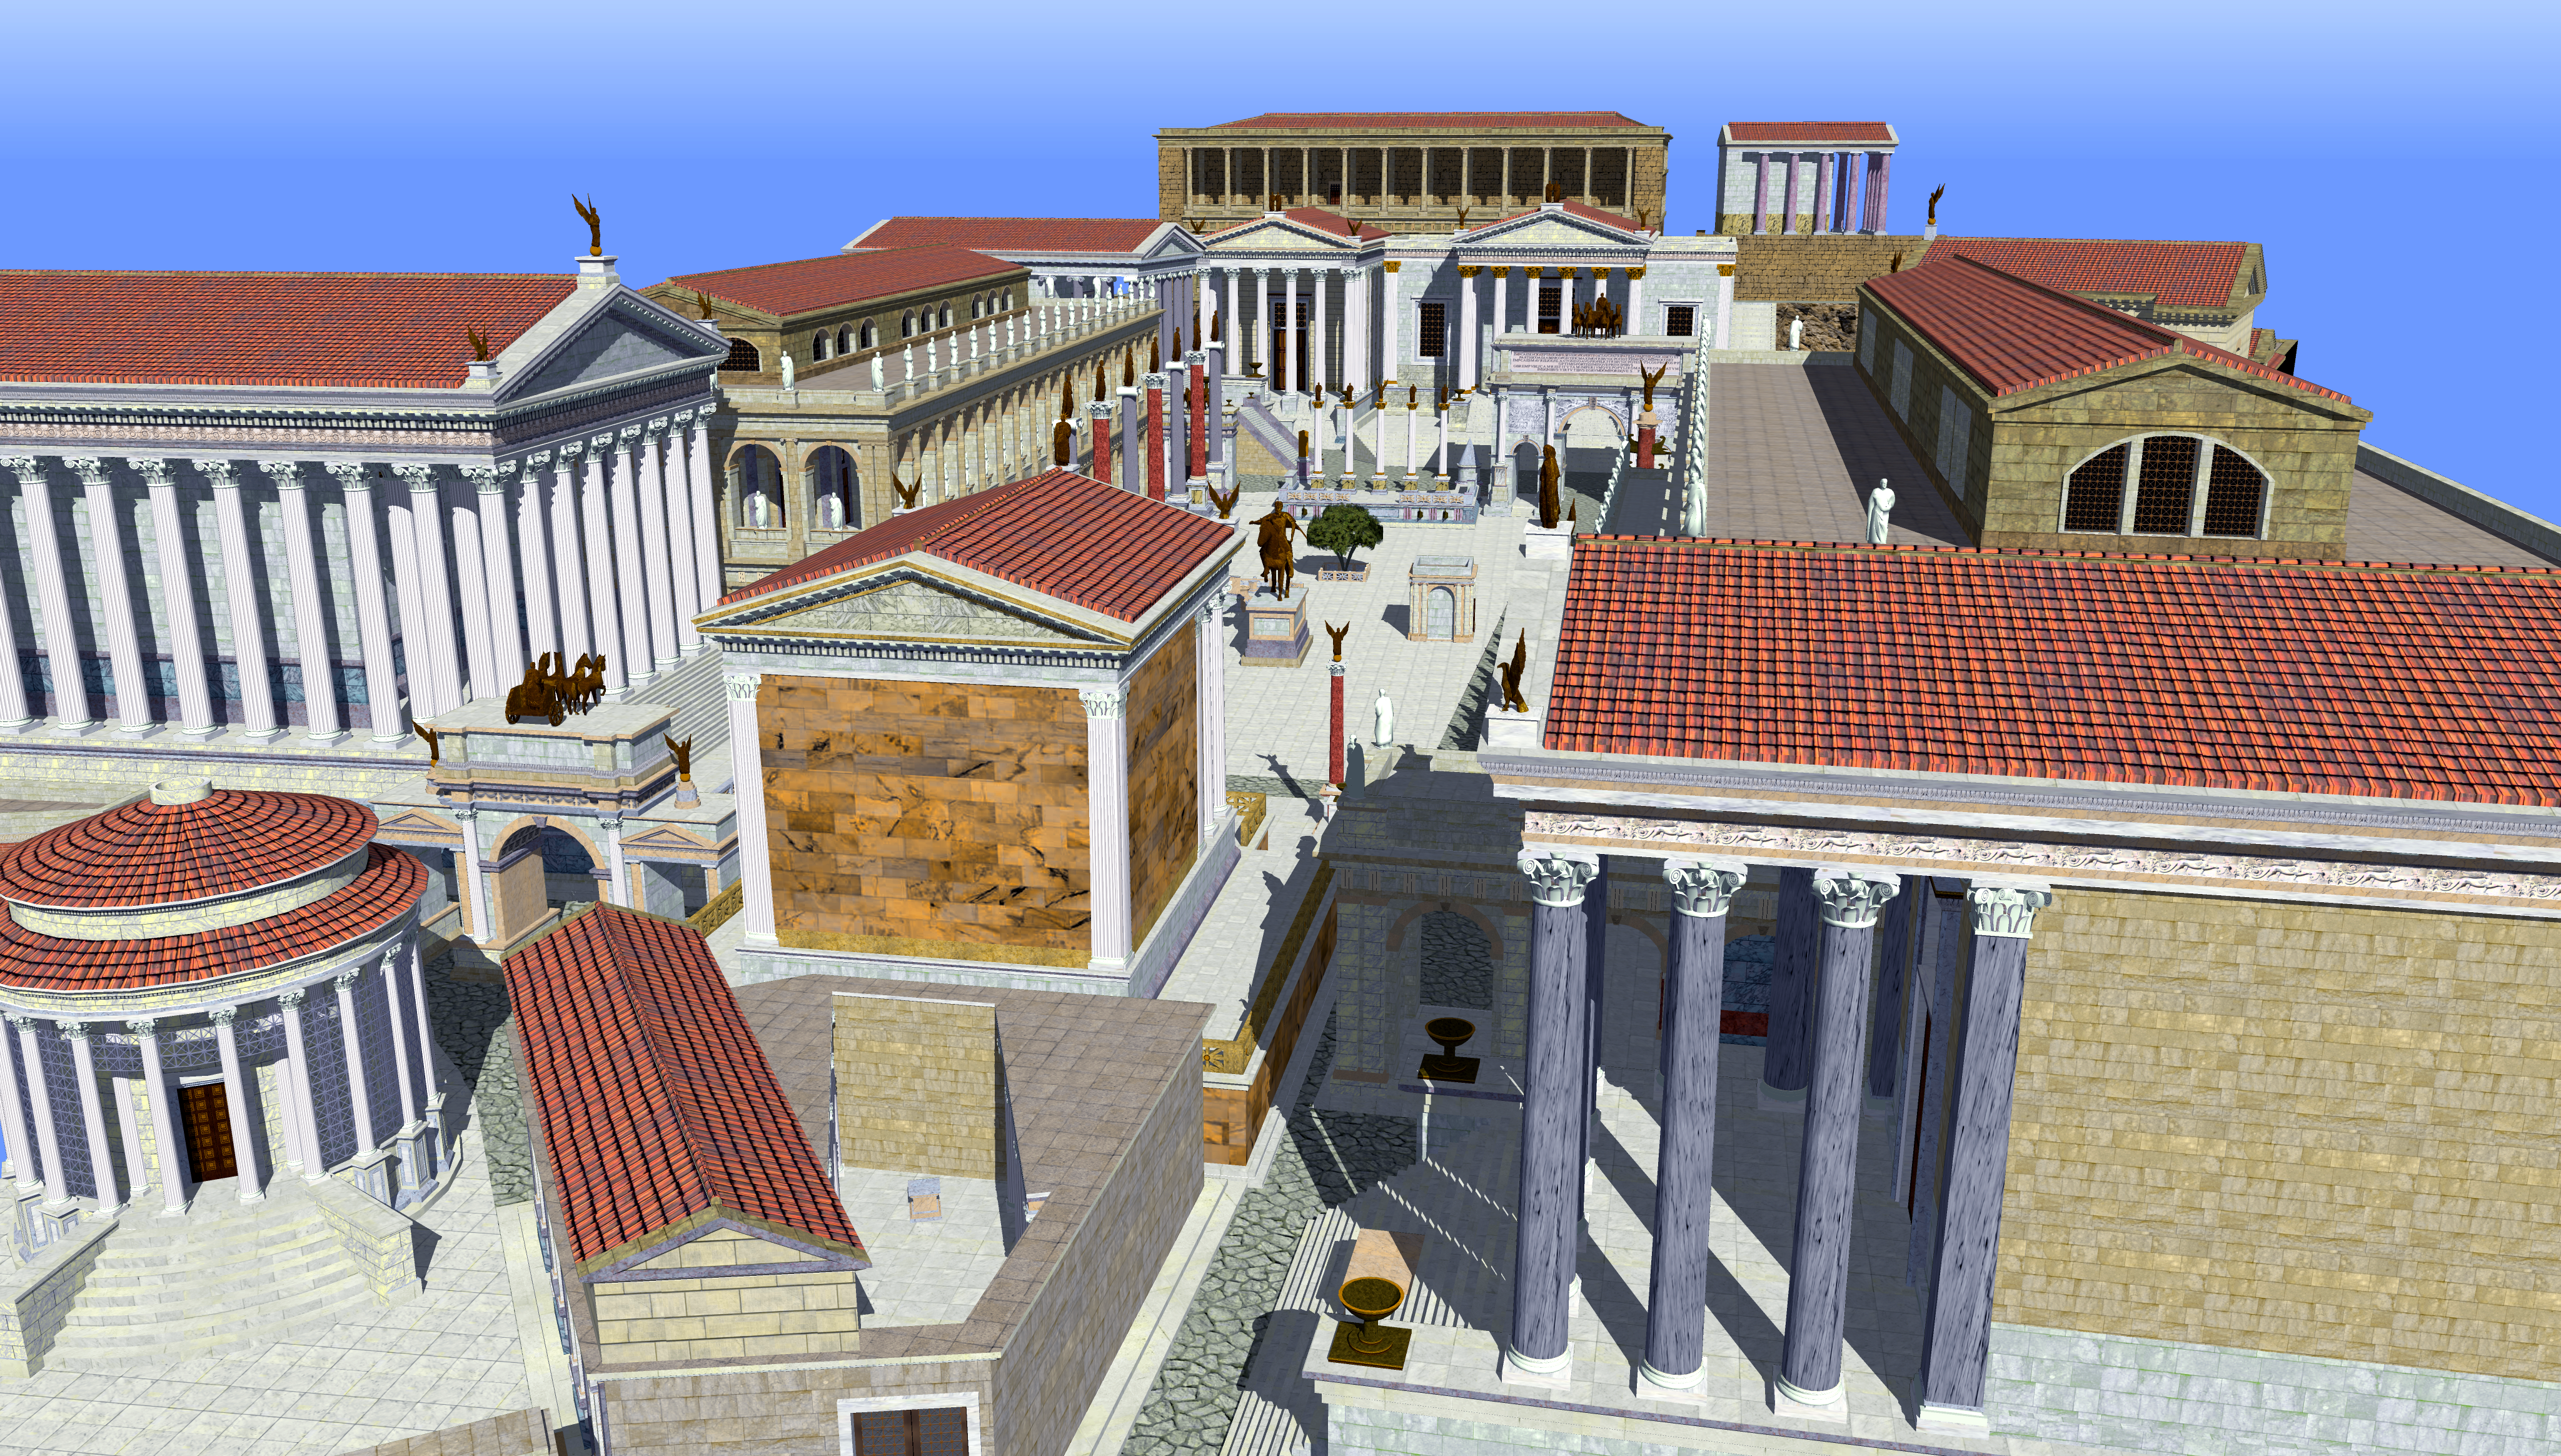 Computer generated image of the Roman forum.